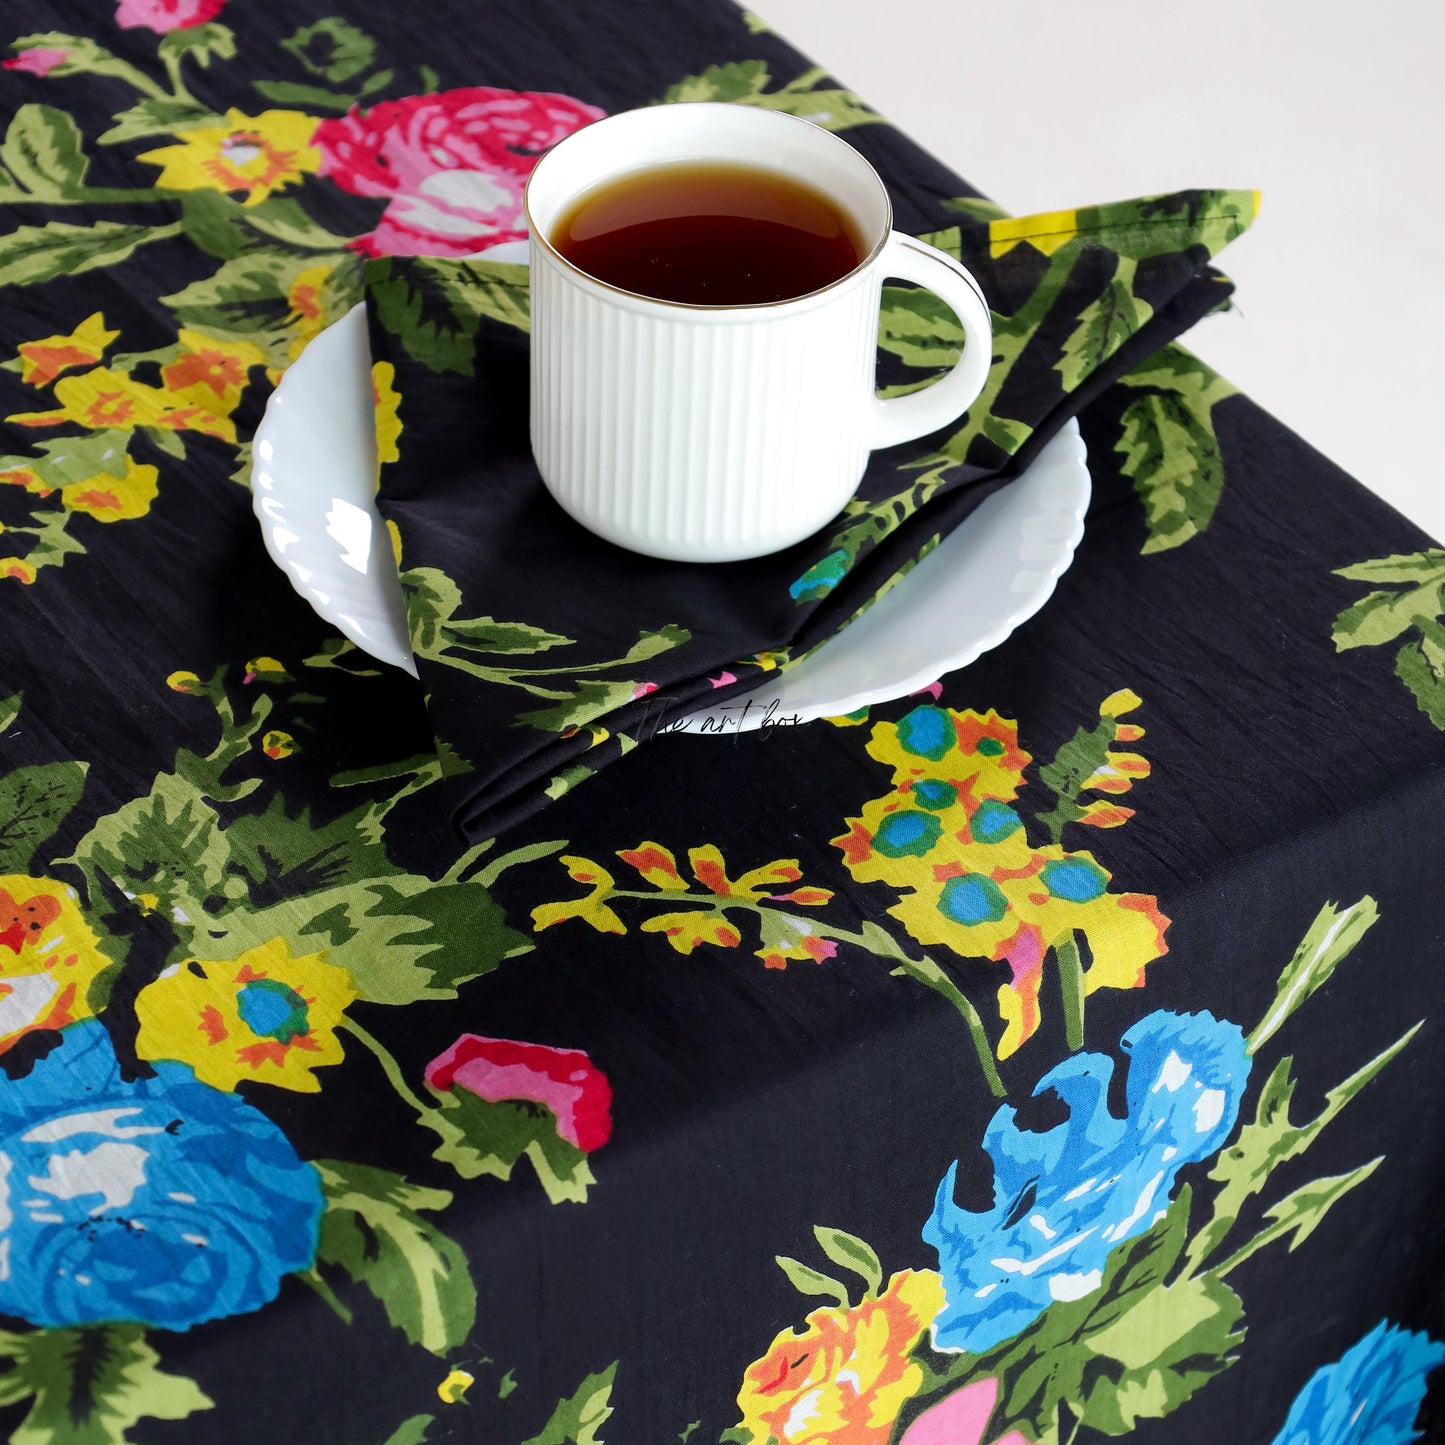 Every Time For Best Black Table Cloth, Floral Printed Cotton Table Cover